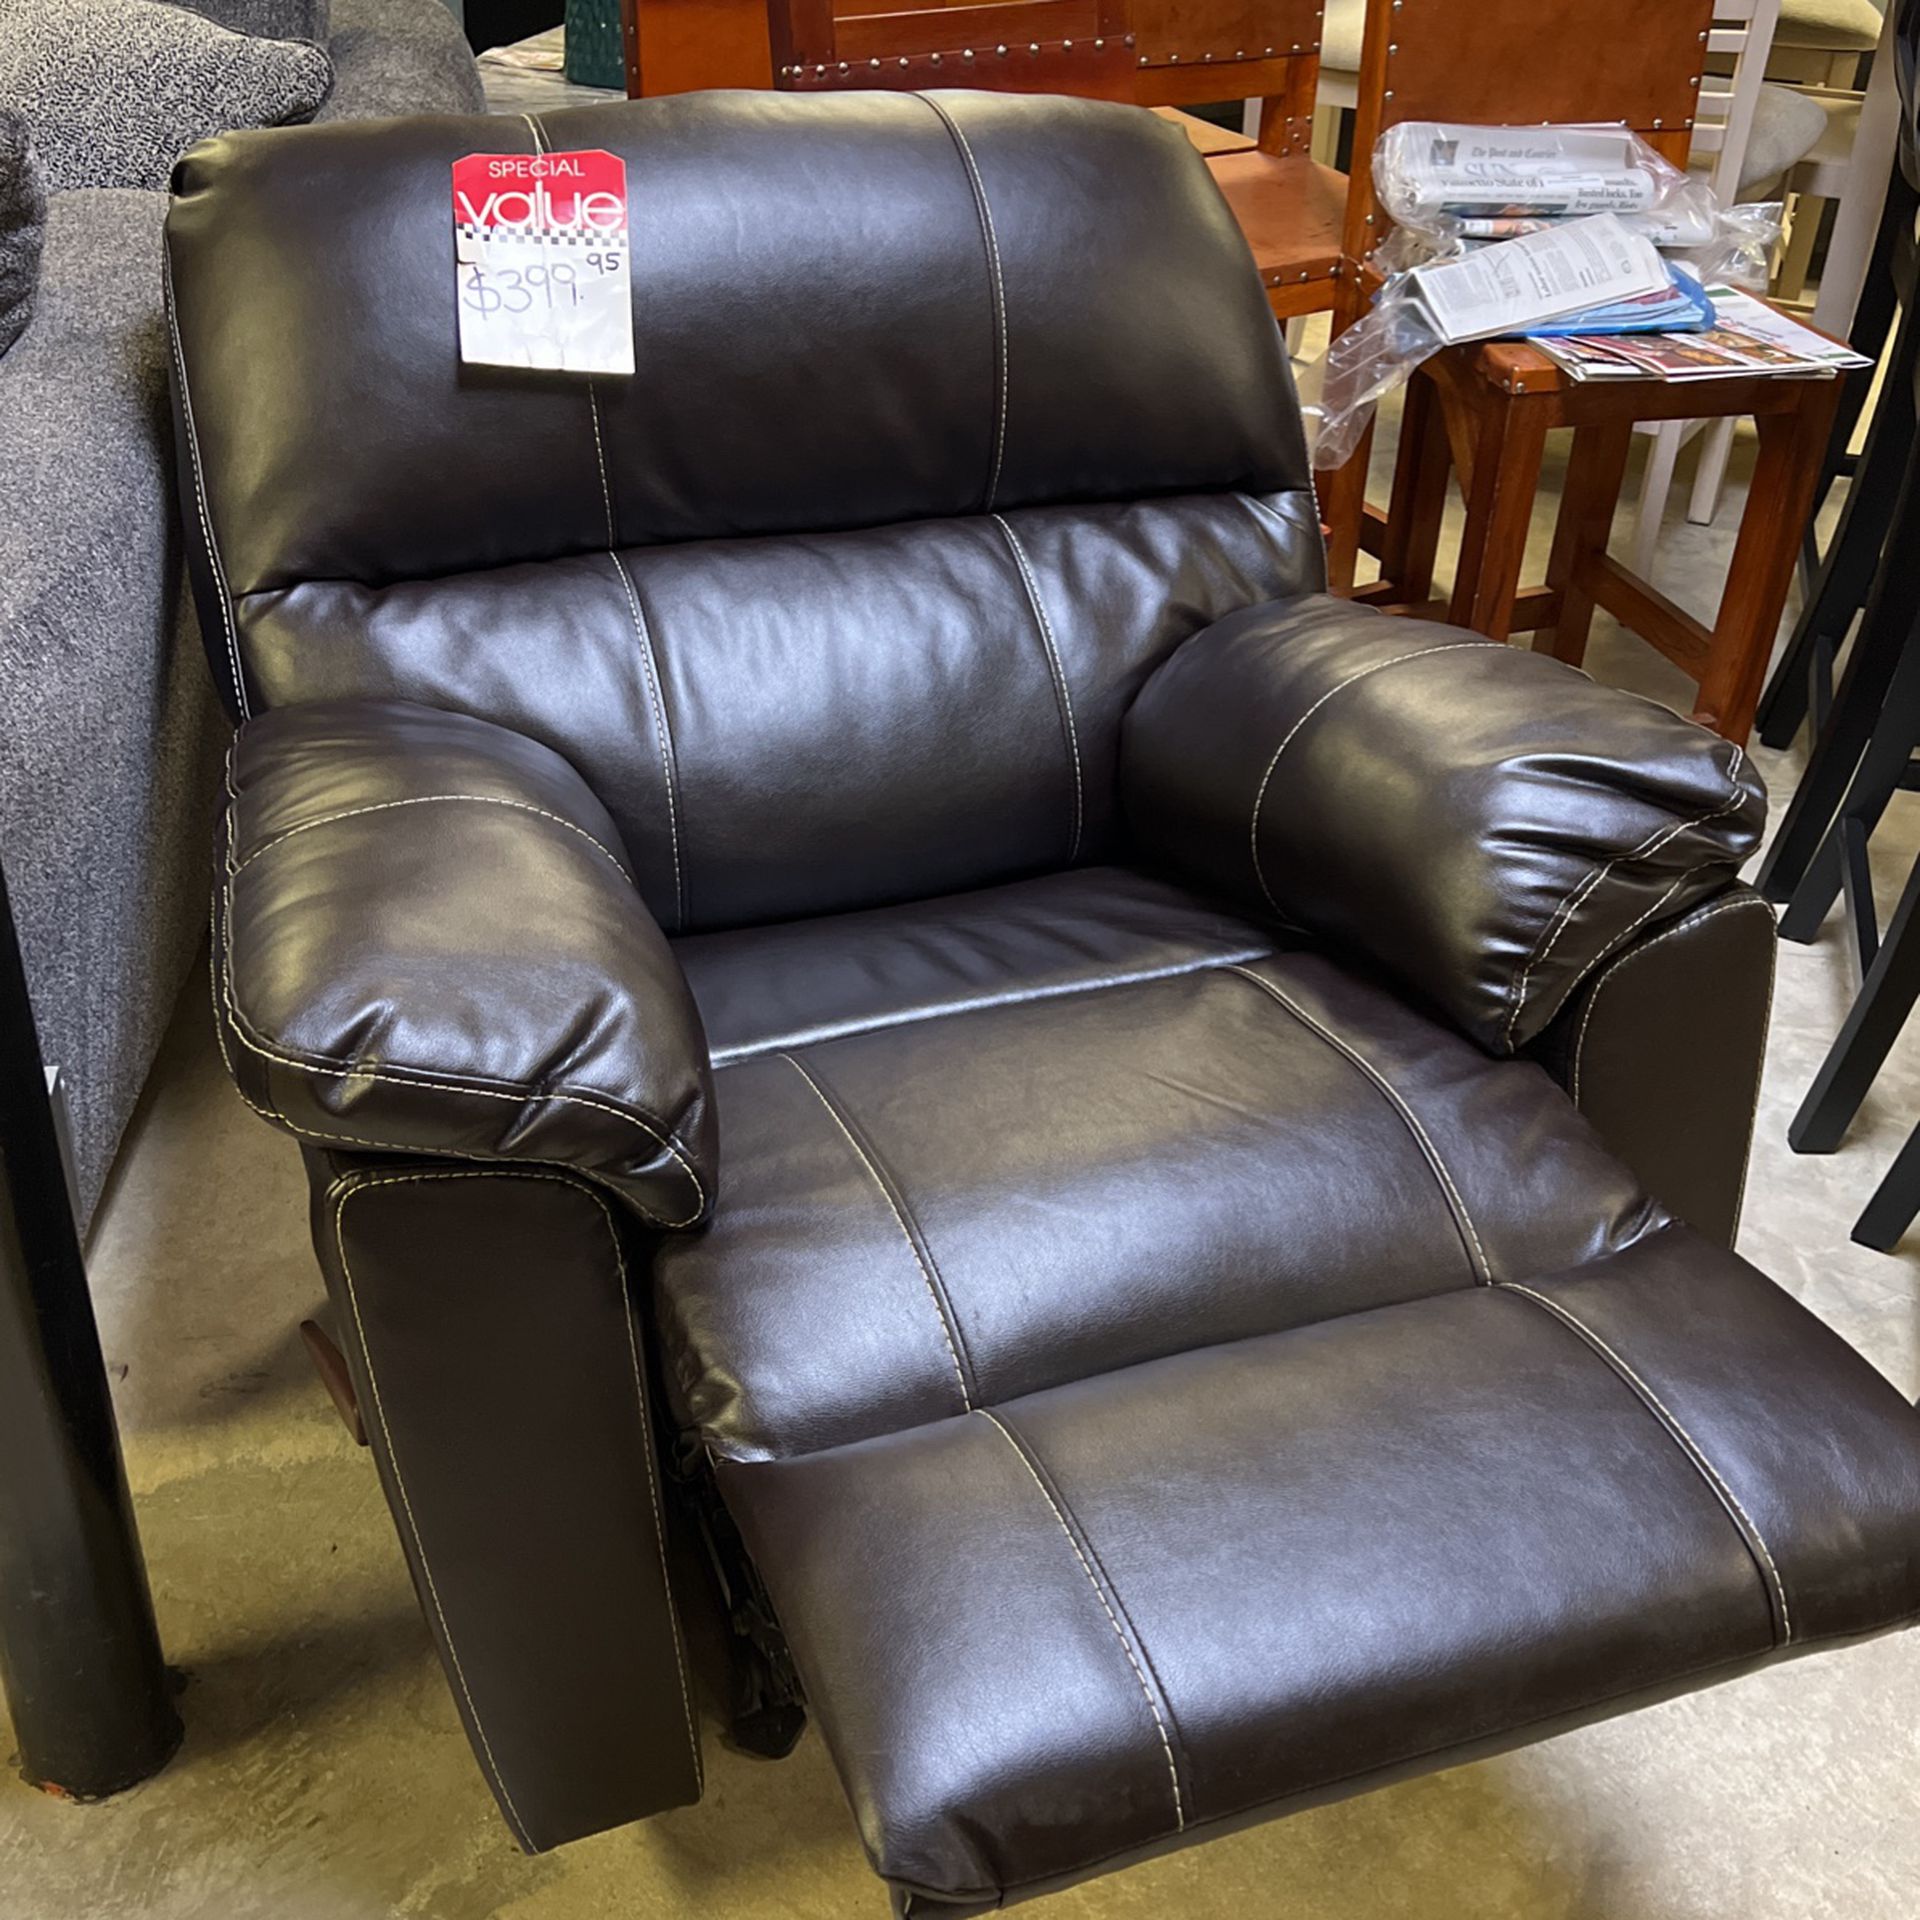 Brand new recliner just in time for Christmas